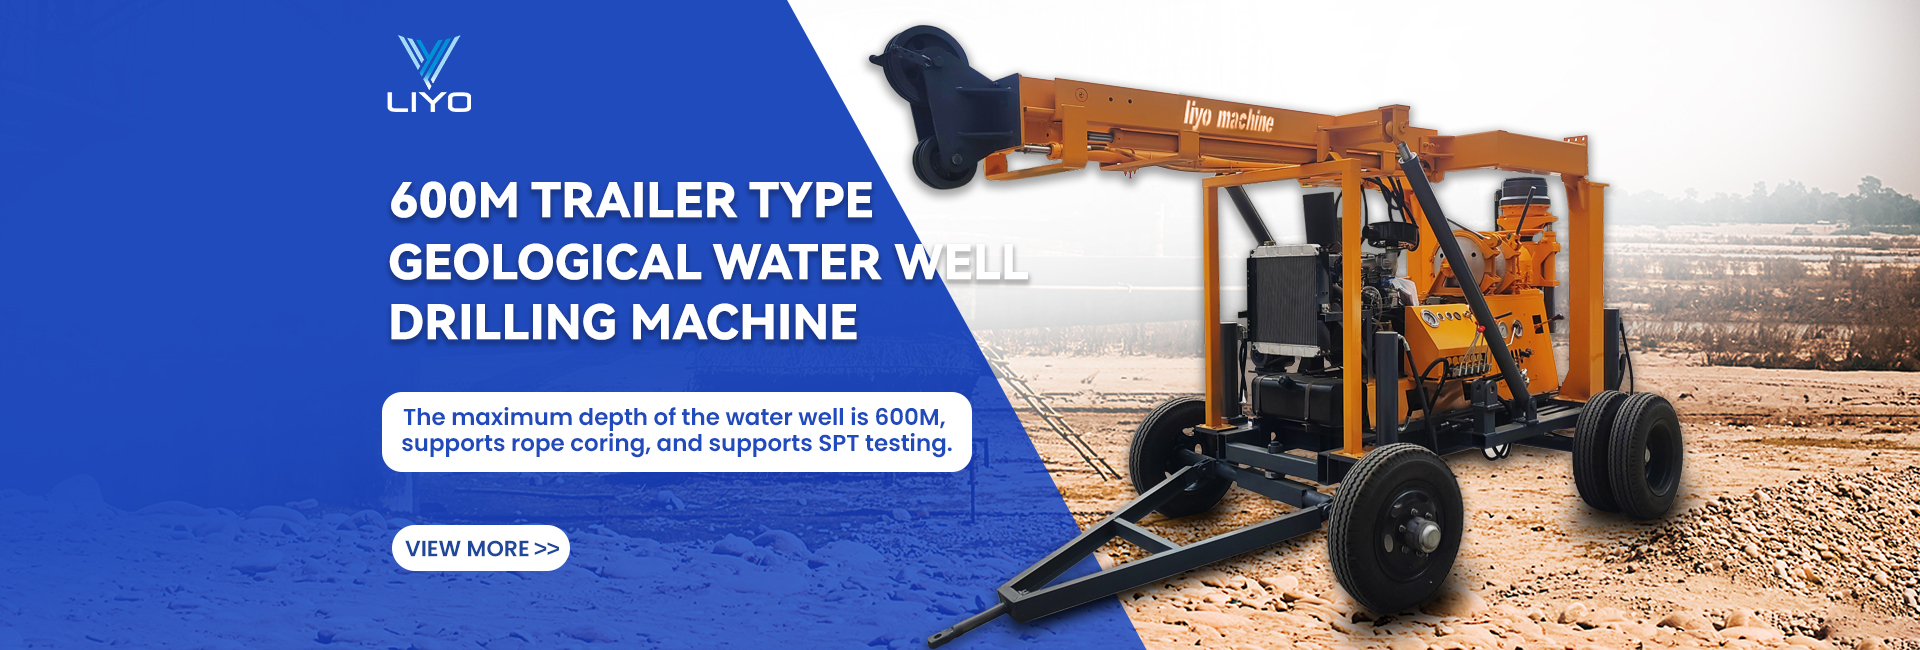 XY-3 600M Geological water well drilling rig